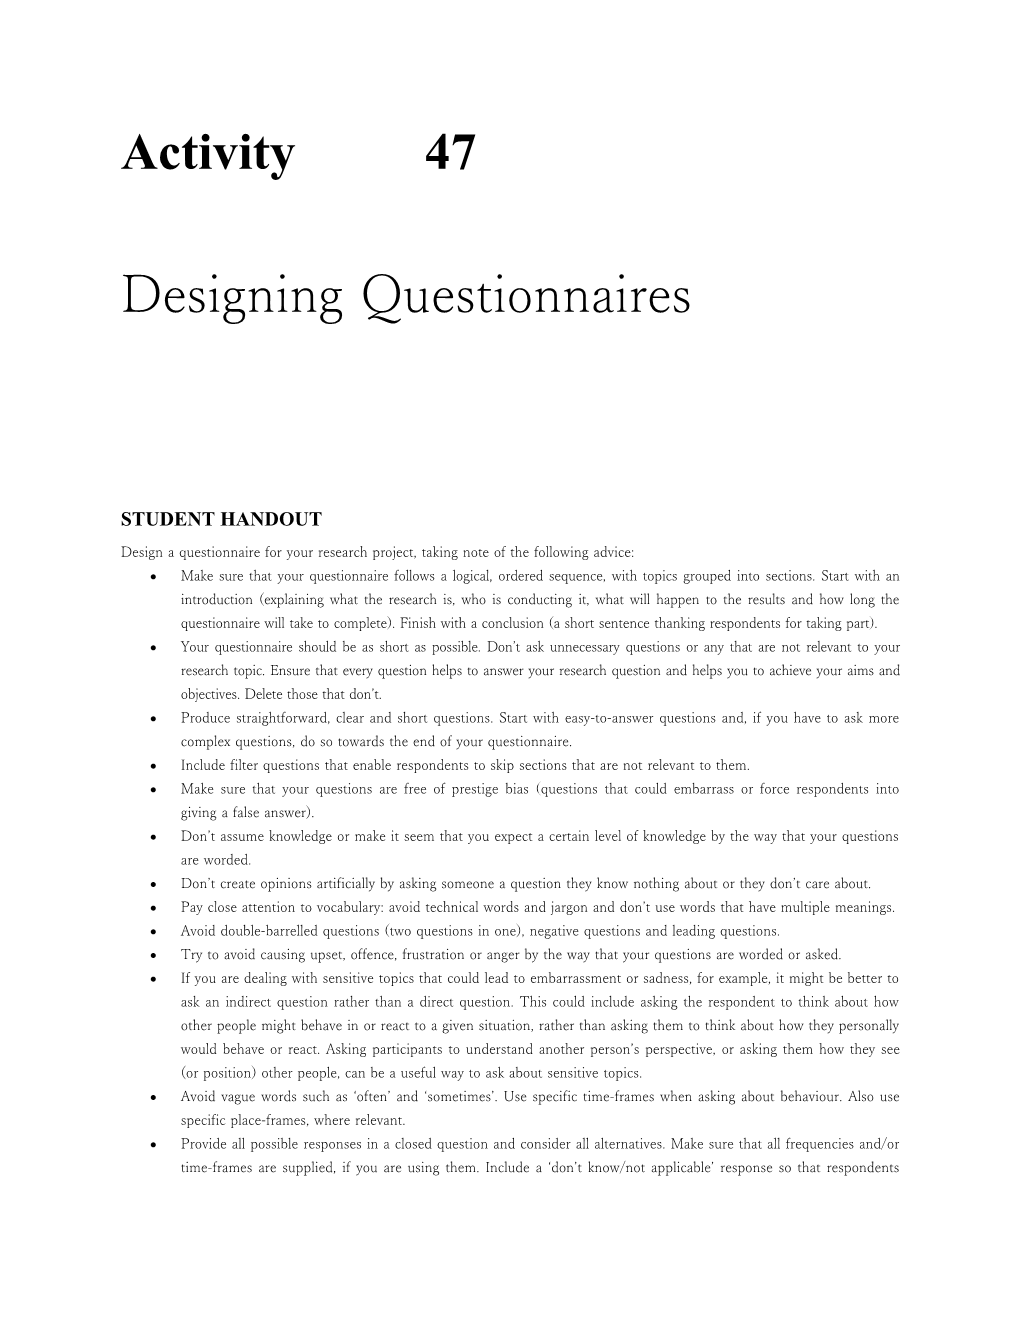 Design a Questionnaire for Your Research Project, Taking Note of the Following Advice